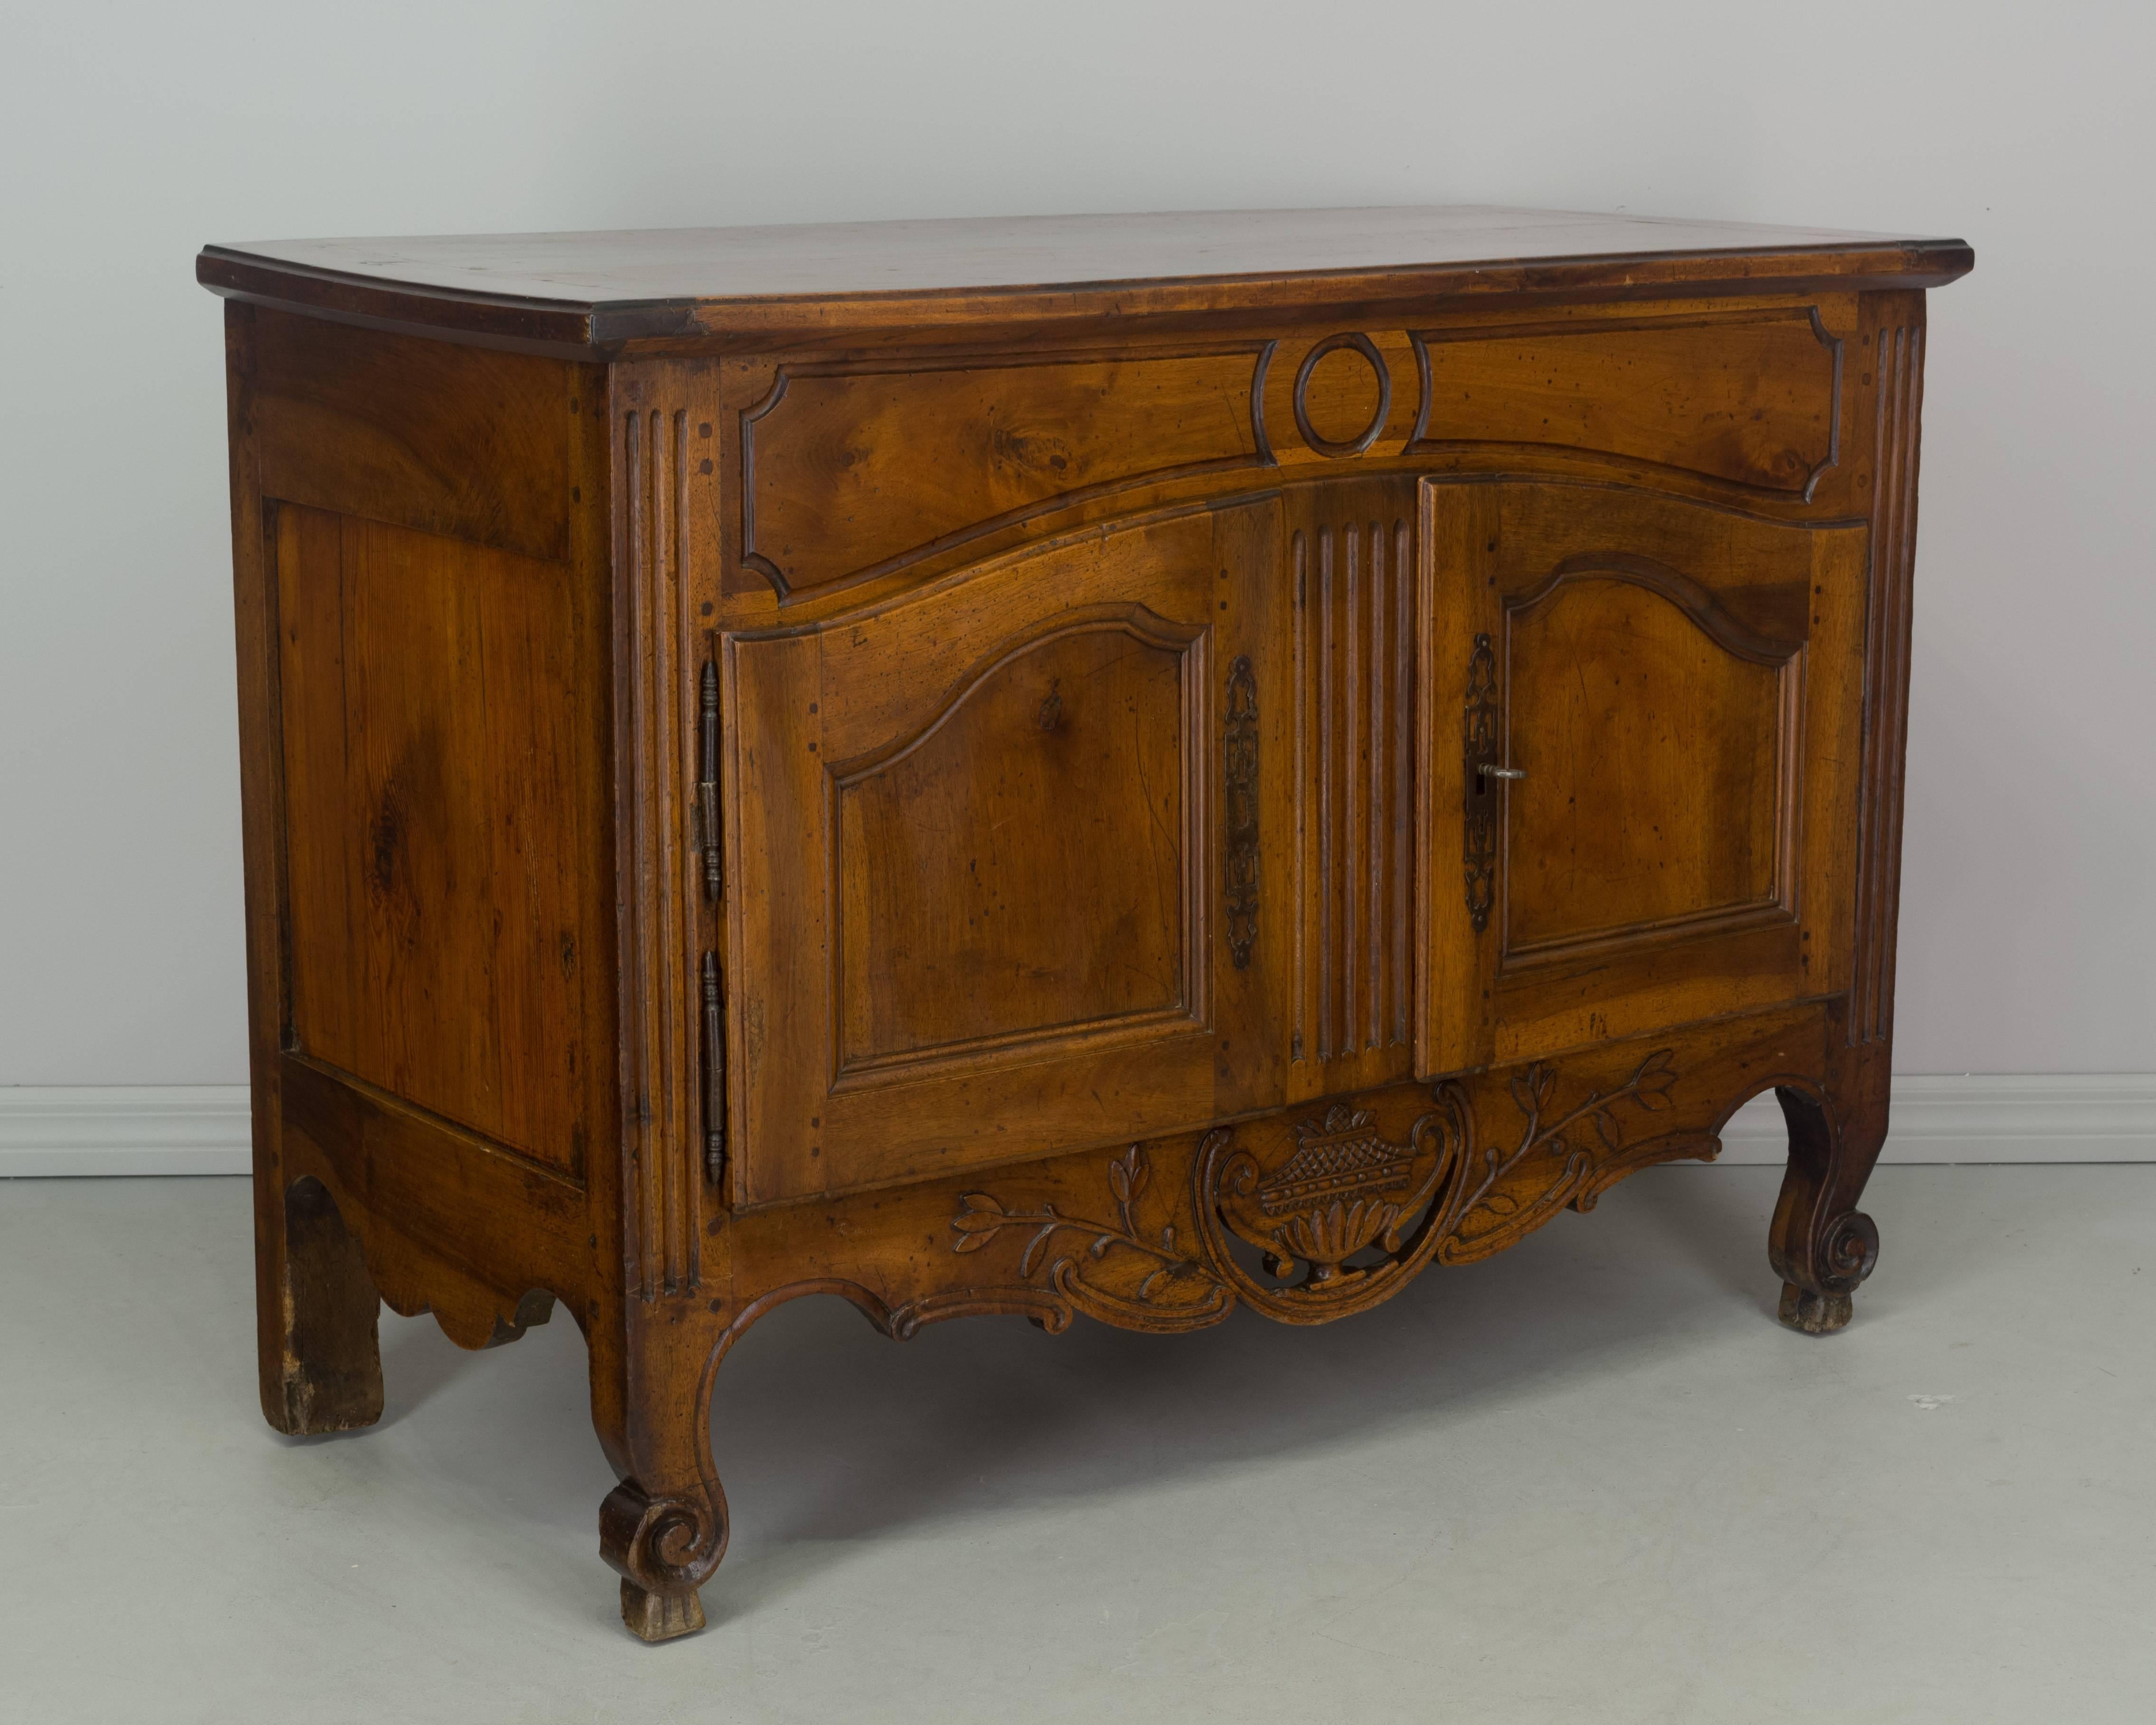 A fine early 19th century Louis XV Provençal buffet made of solid walnut with pine as a secondary wood. The top of this buffet slides forward to reveal a removable original dough box. Nice proportions and hand carvings including a pierced apron.